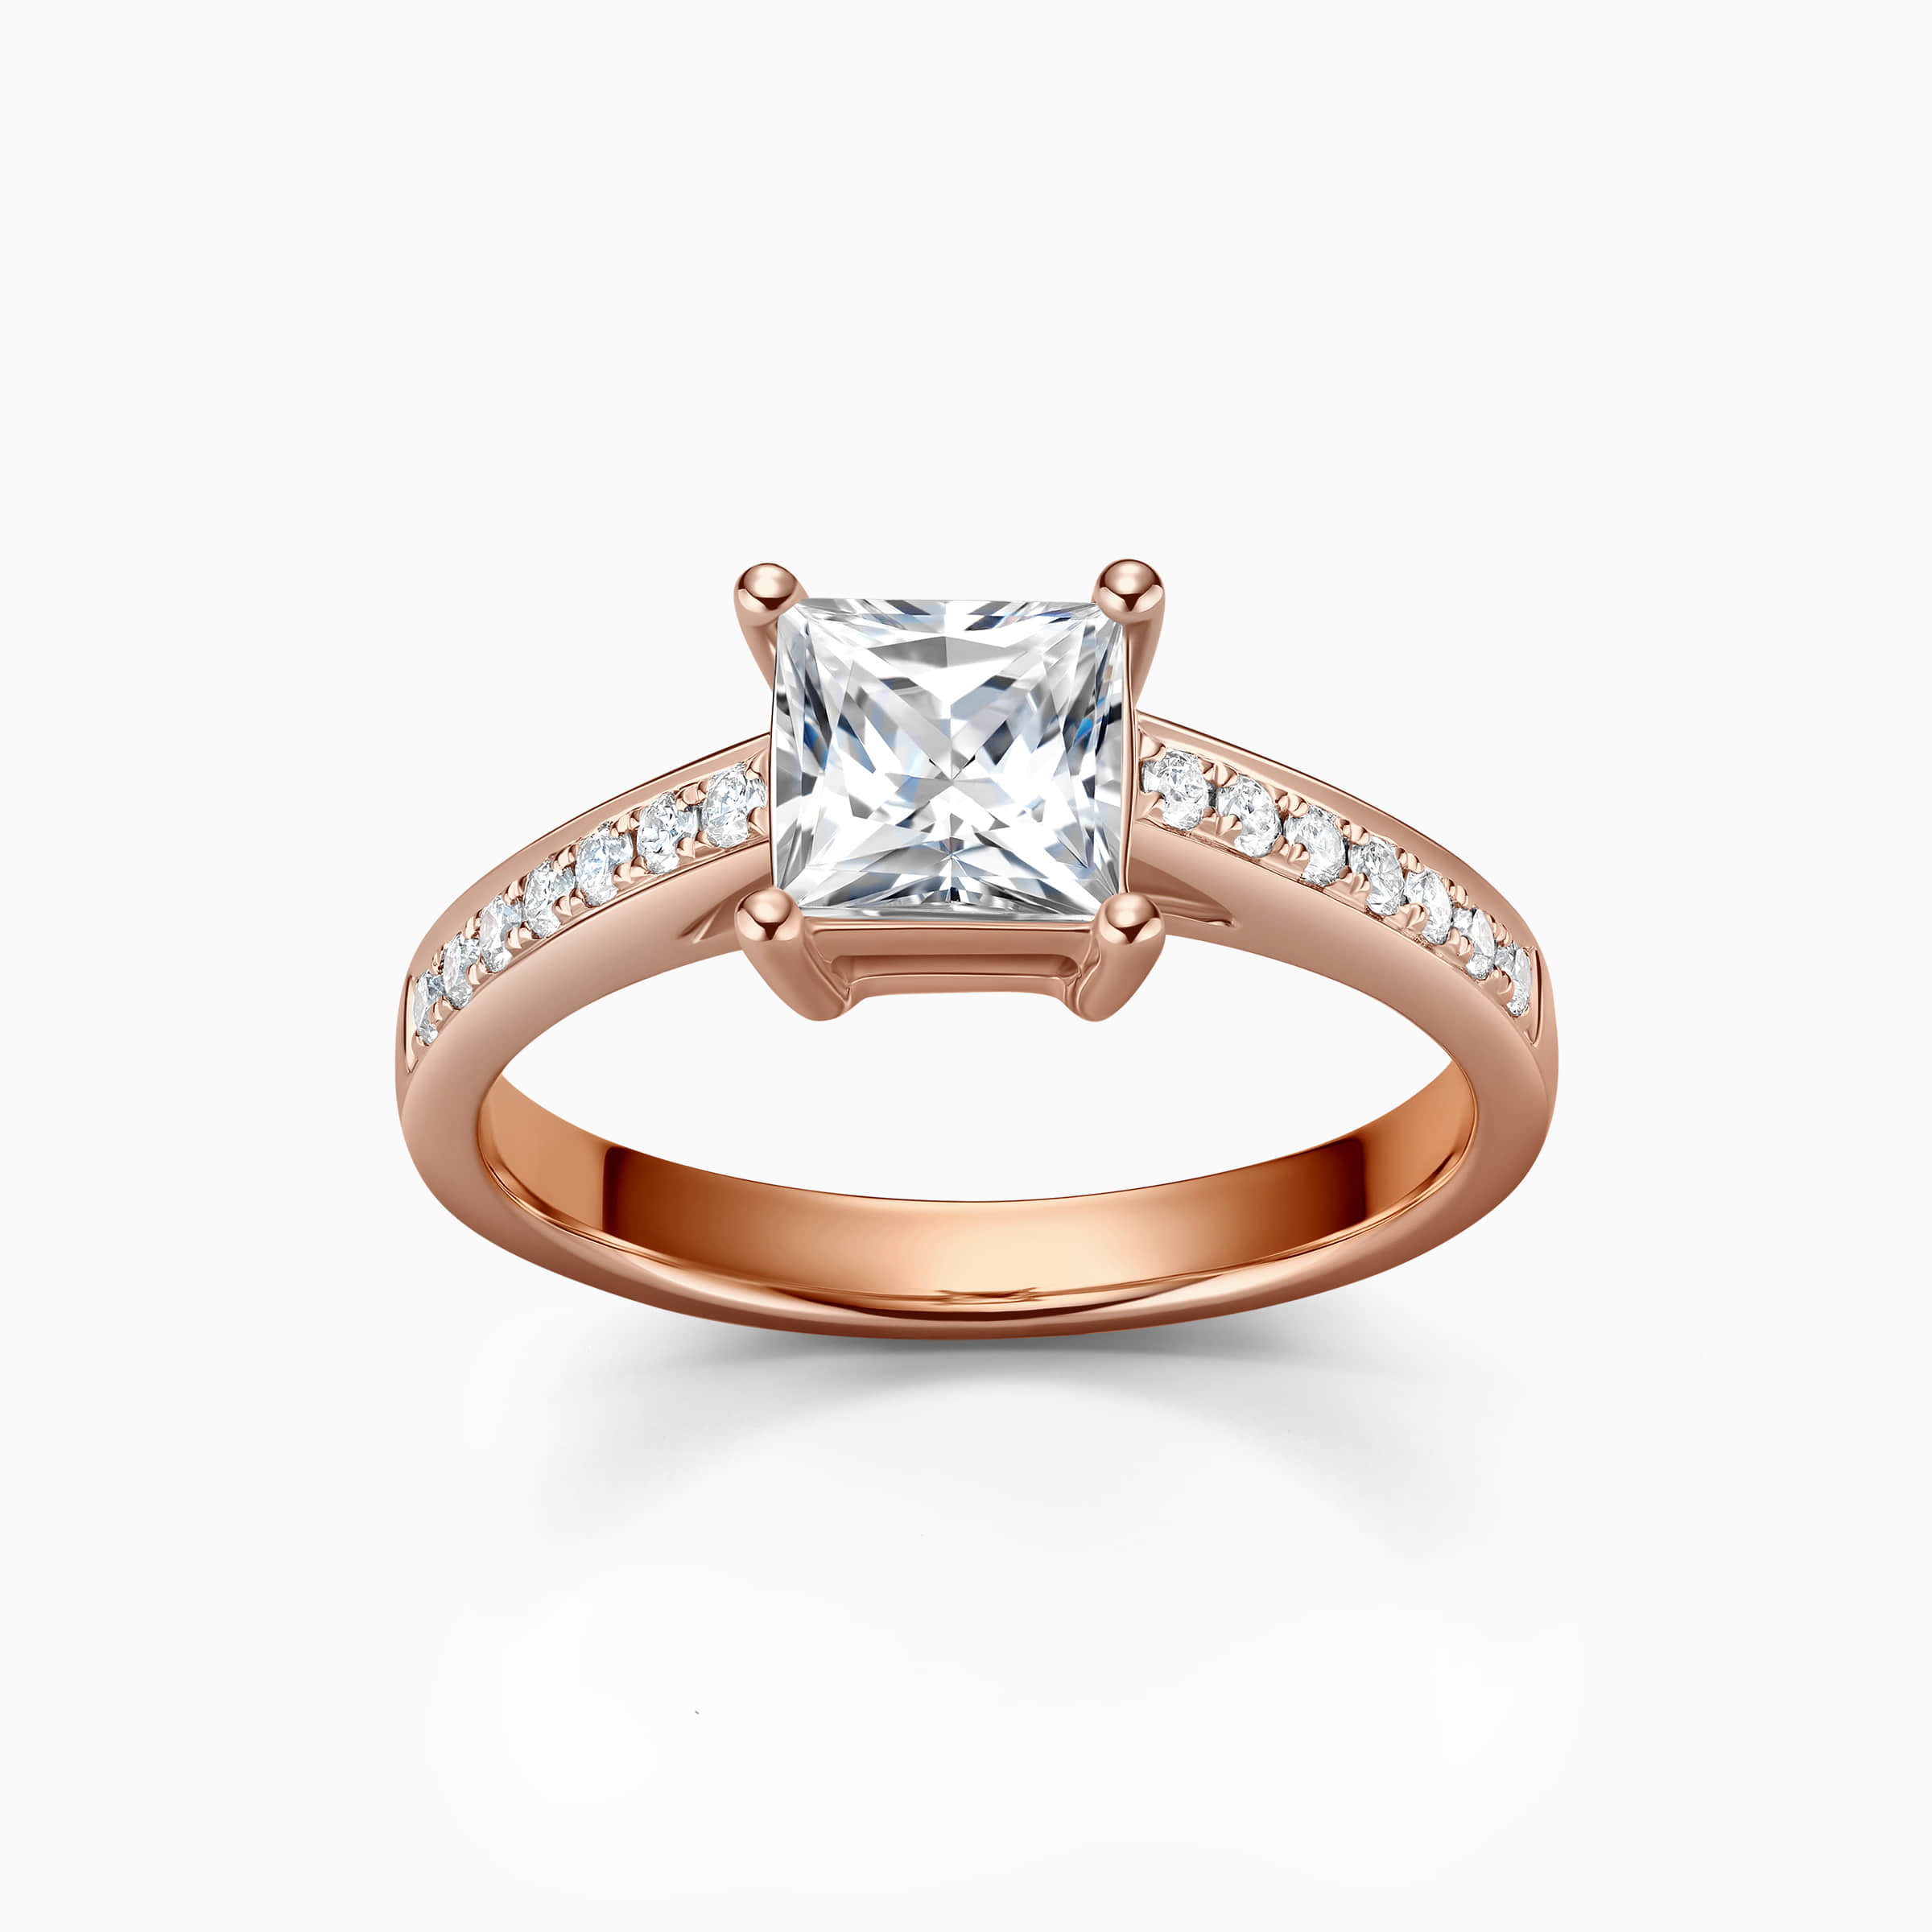 Darry Ring princess cut promise ring rose gold